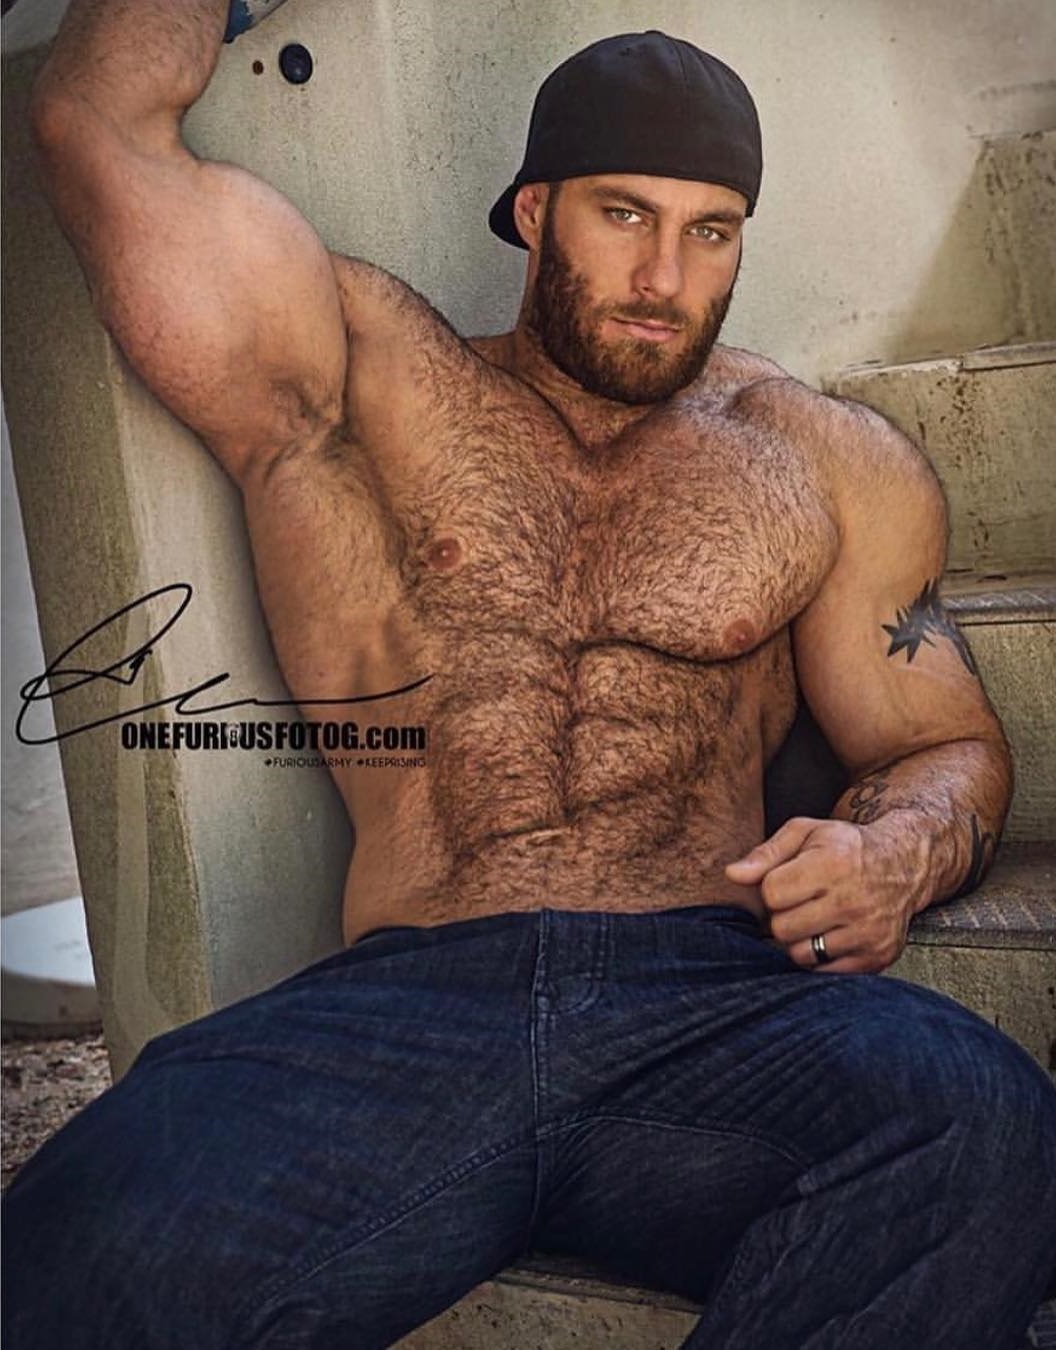 Muscle Lover: The Colossal Cajun Caleb Blanchard (2)